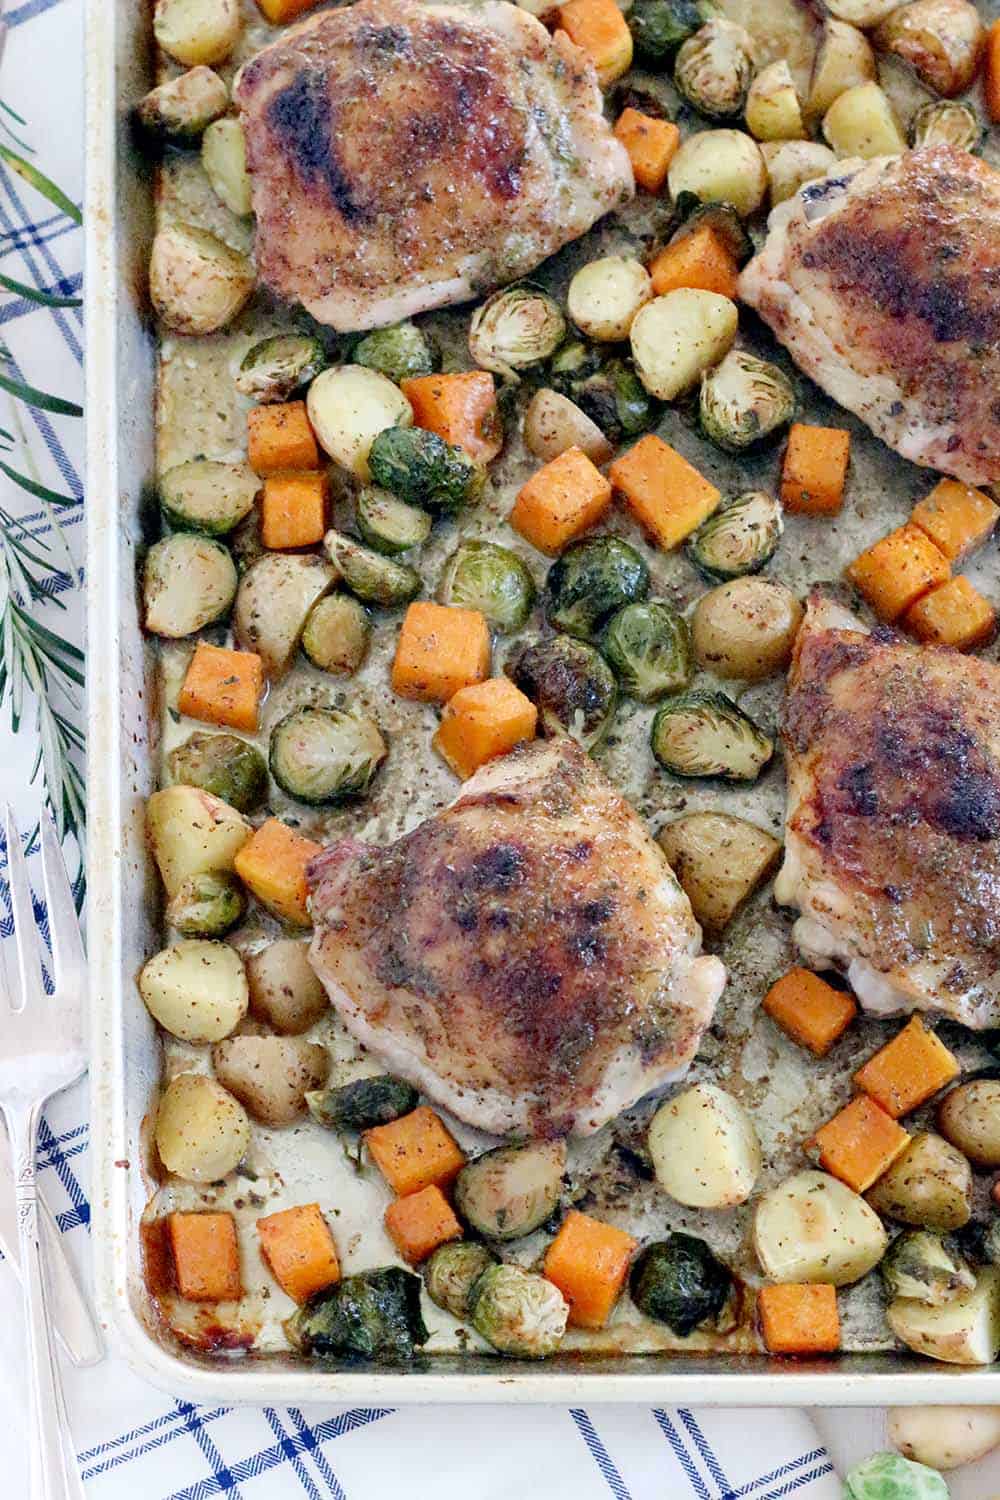 This Maple and Rosemary Glazed Chicken and Fall Veggies Sheet Pan Dinner is an easy way to make a full meal in one pan! Slightly sweet and savory at once, the flavor of the glaze is amazing and coats every single bite. The whole family will love this. #sheetpandinner #paleo #brusselssprouts